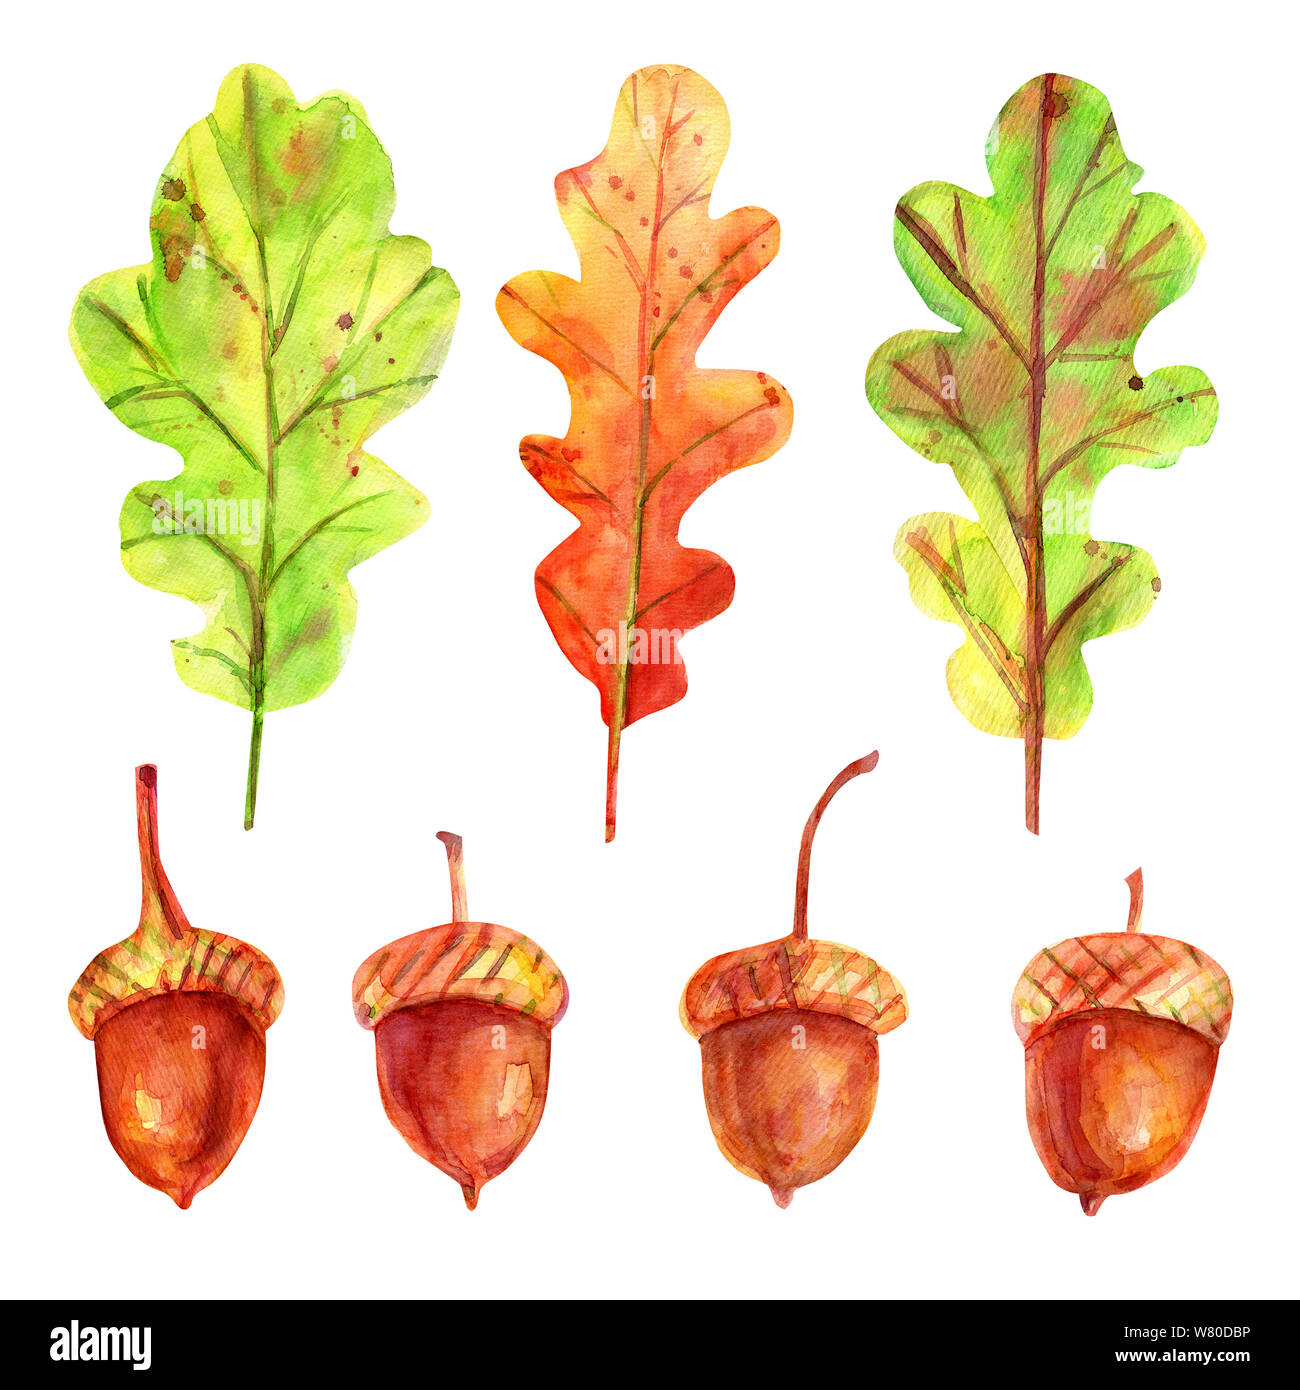 Watercolor autumn set with leaves and acorns. Four seeds of a tree of an oak red-brown color with a gold-ocher cup. 3 fallen leaves in green and orang Stock Photo